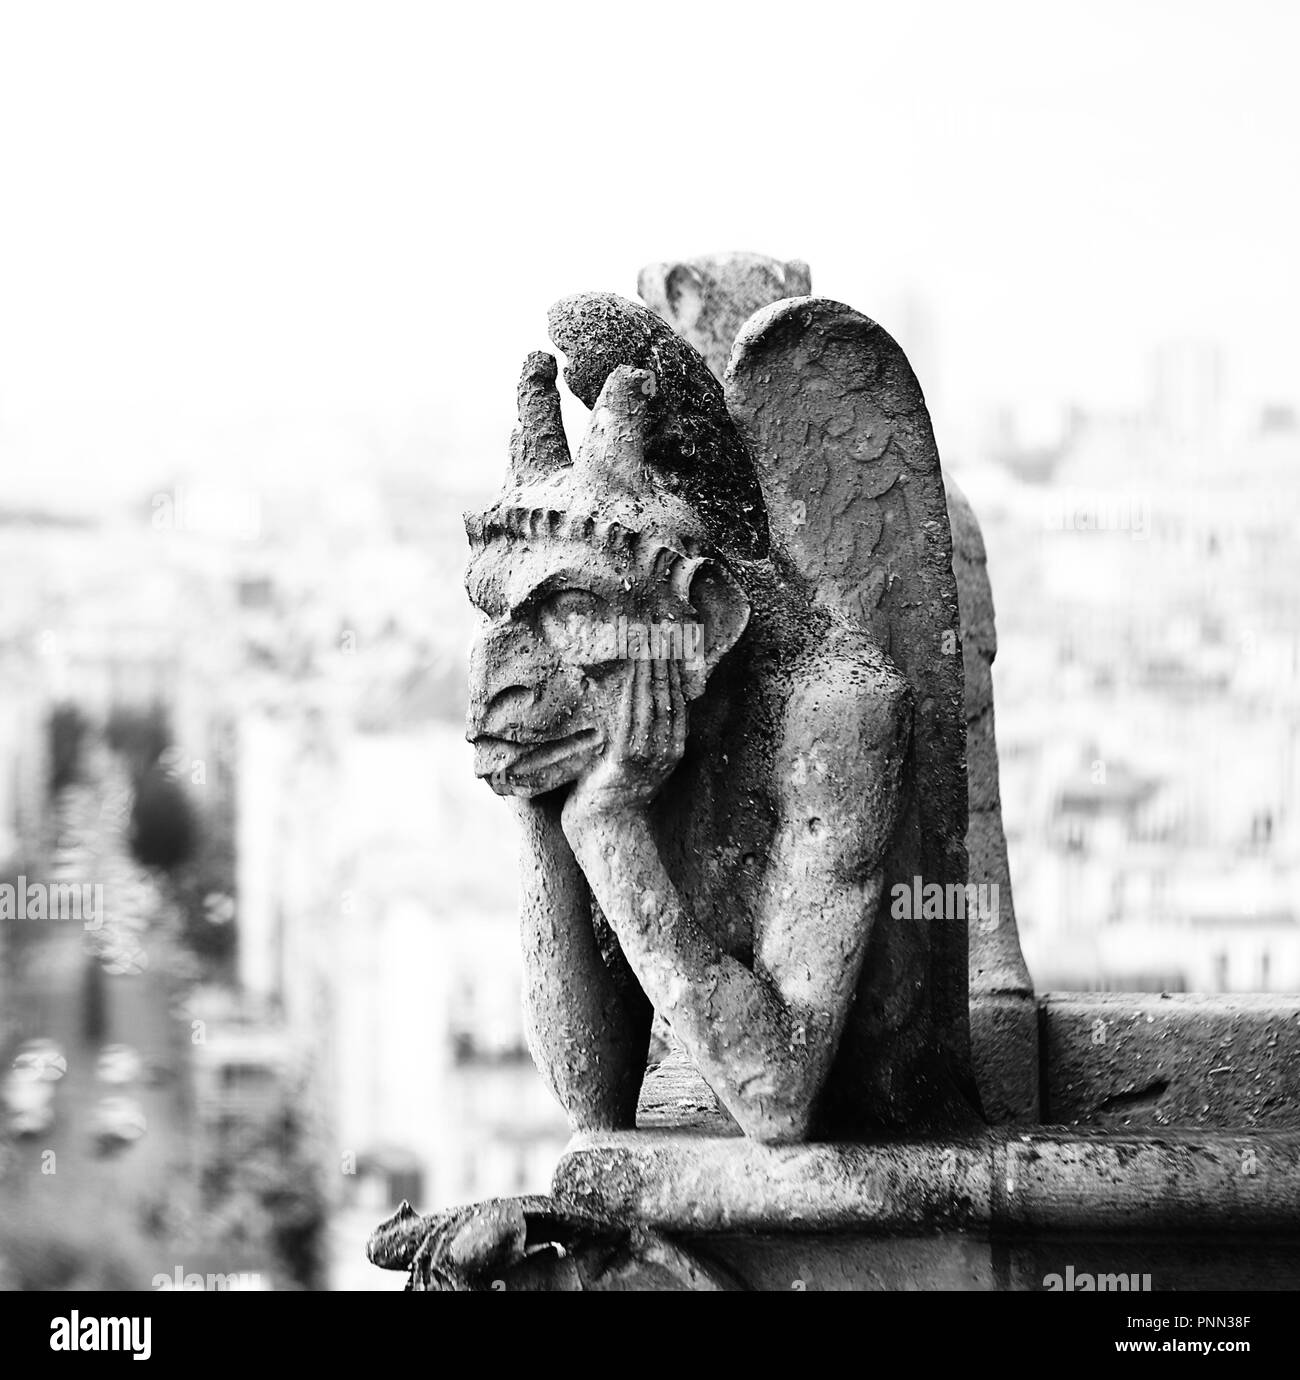 grotesque or Chimaera is a animal figure on the Basilica of Notre Dame in Paris with high Key Lights Effect Stock Photo